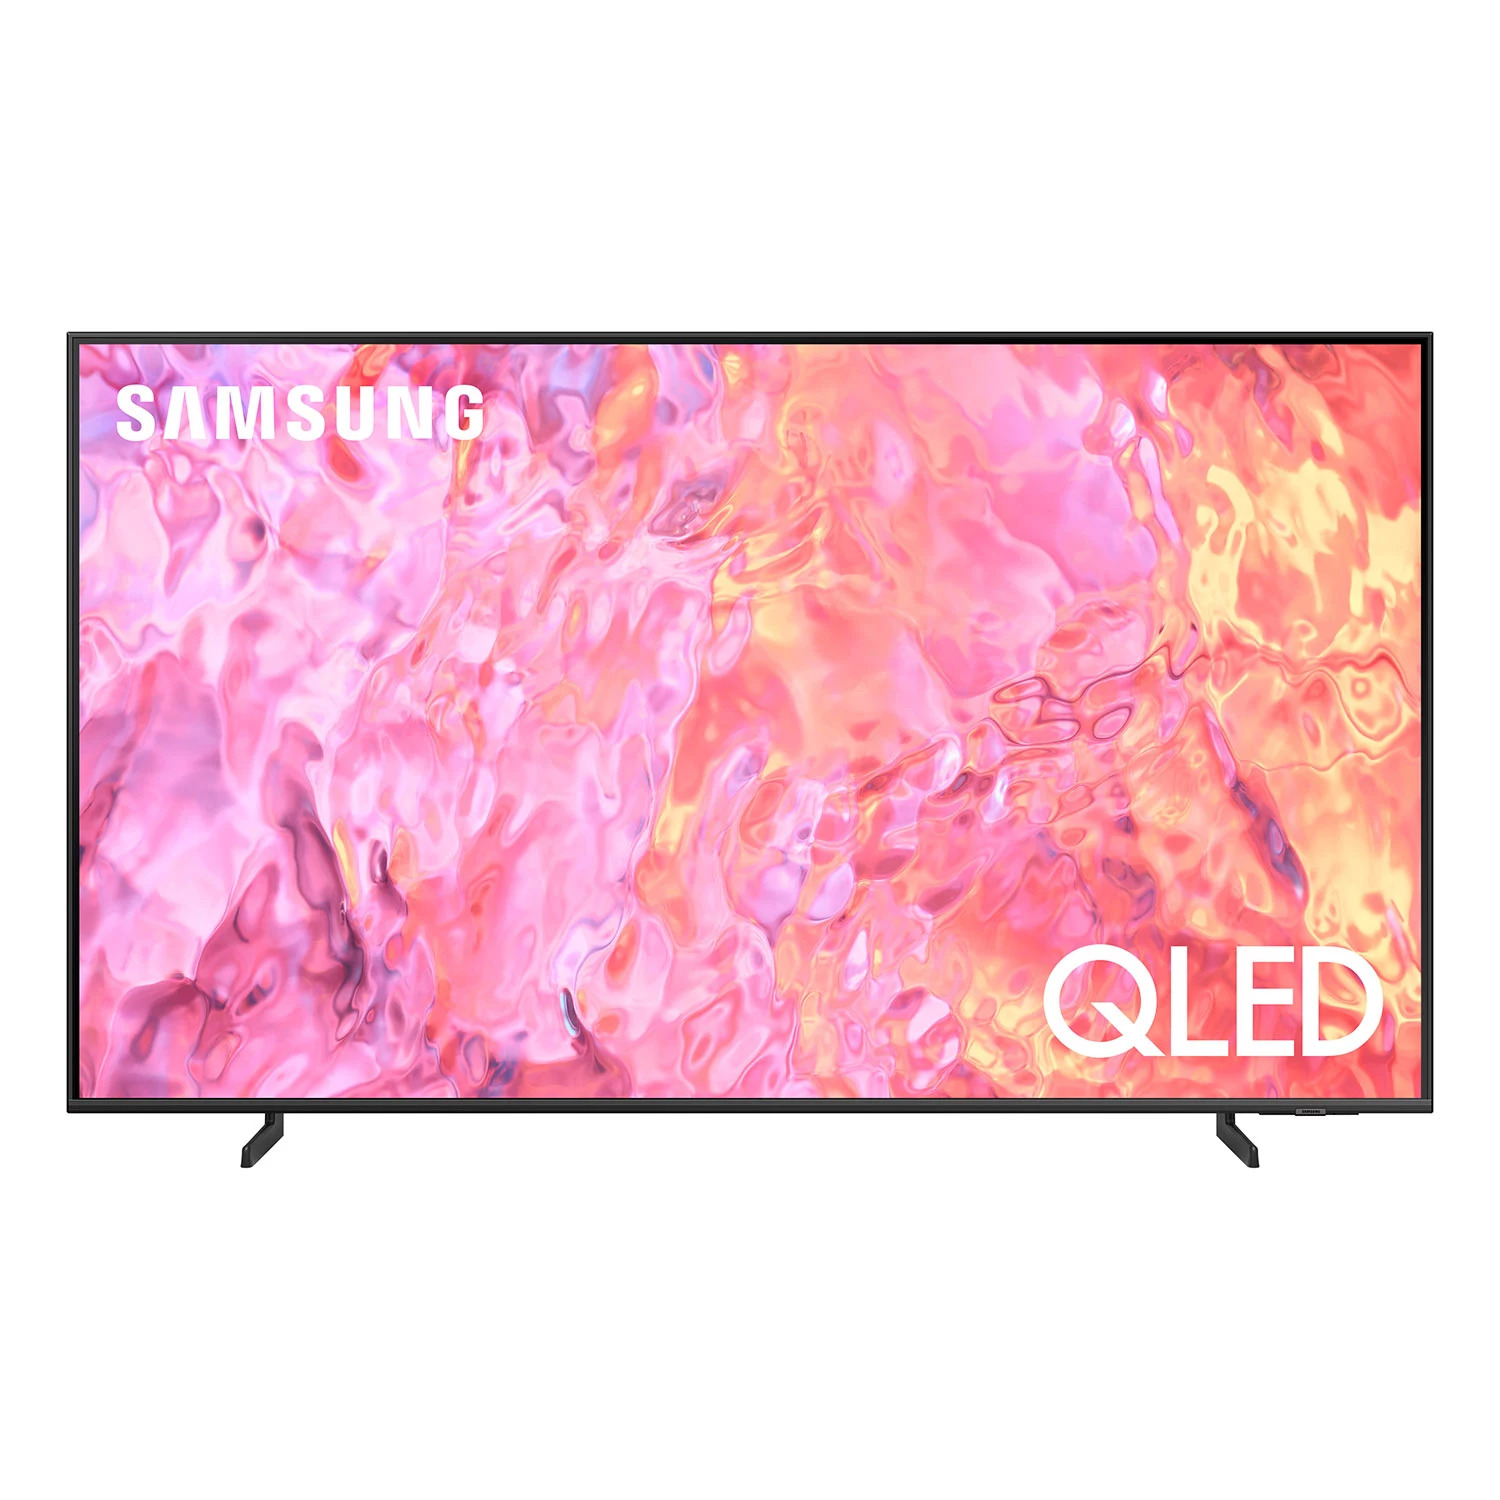 samsung Q60 BD 65 inches QLED TV in Sams Club In store - $697